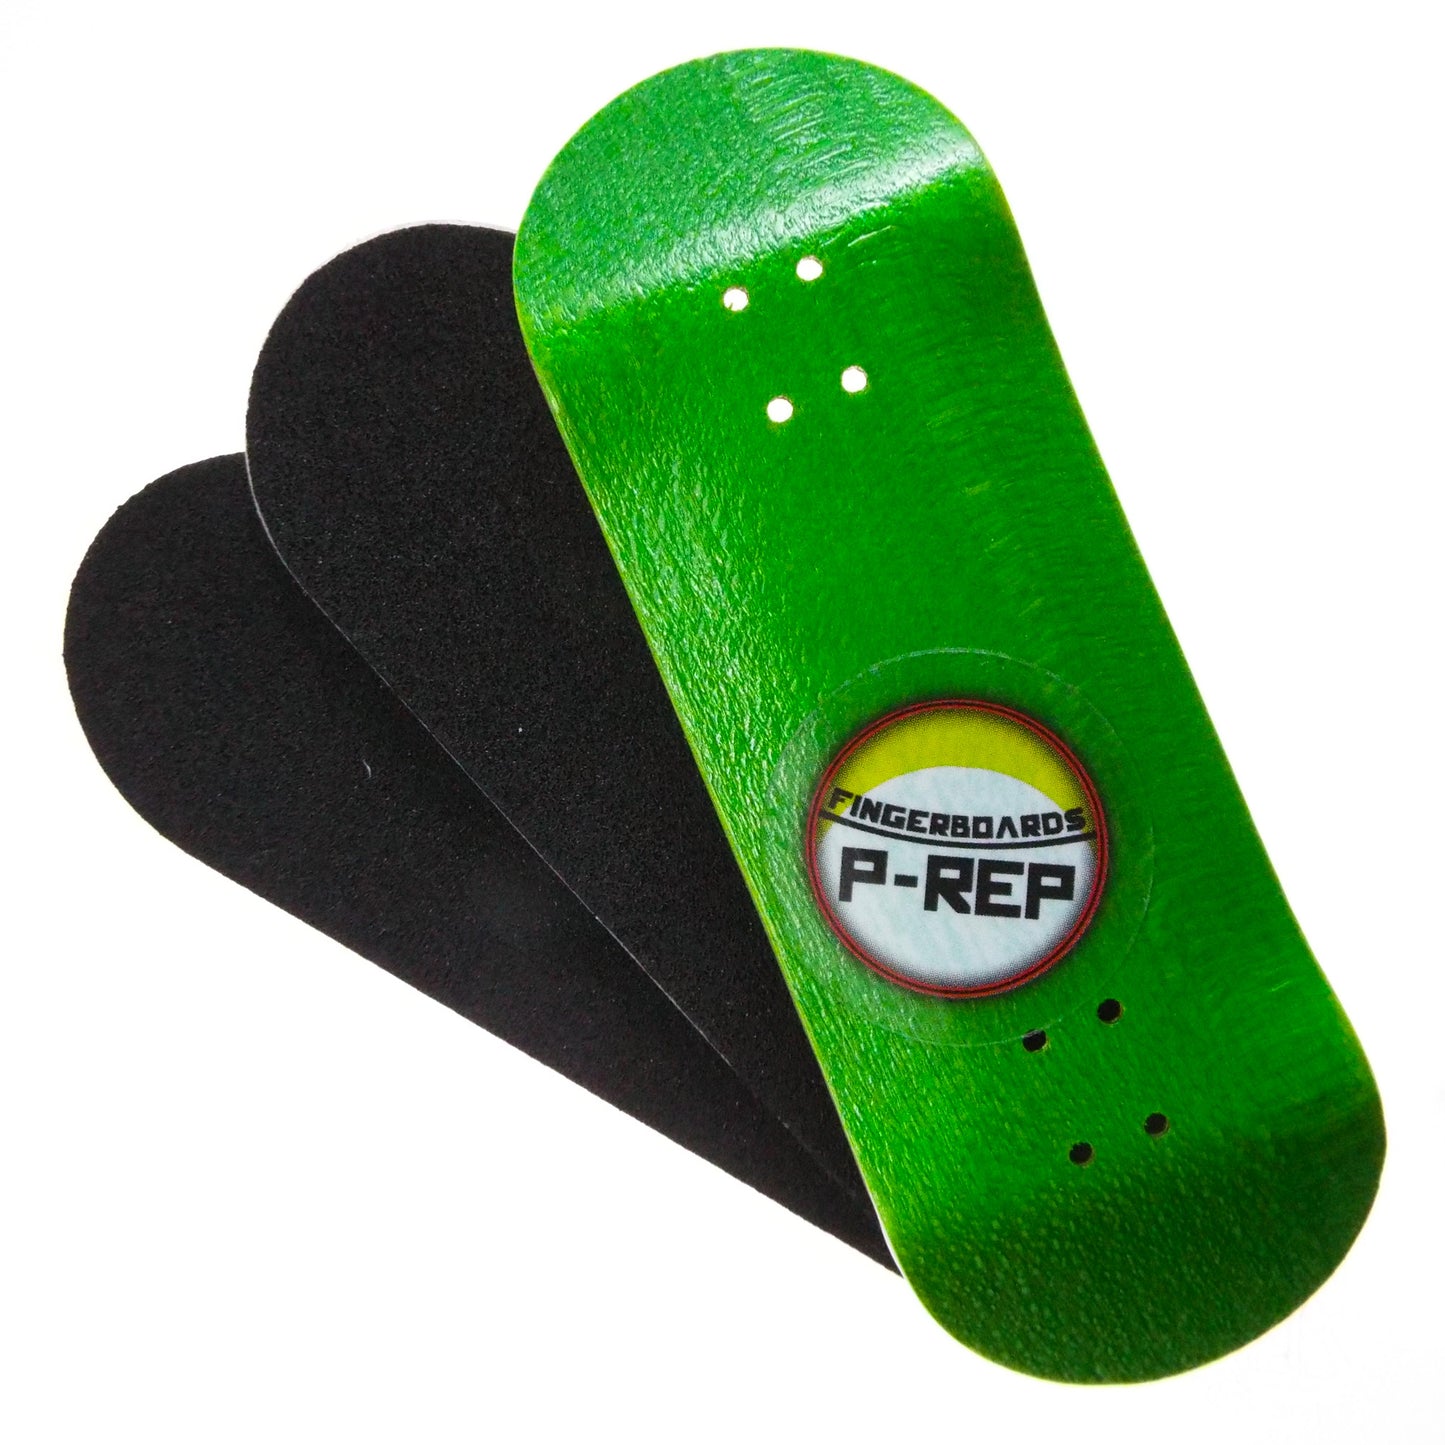 P-REP  32mm x 97mm V2 Standard Complete - Green